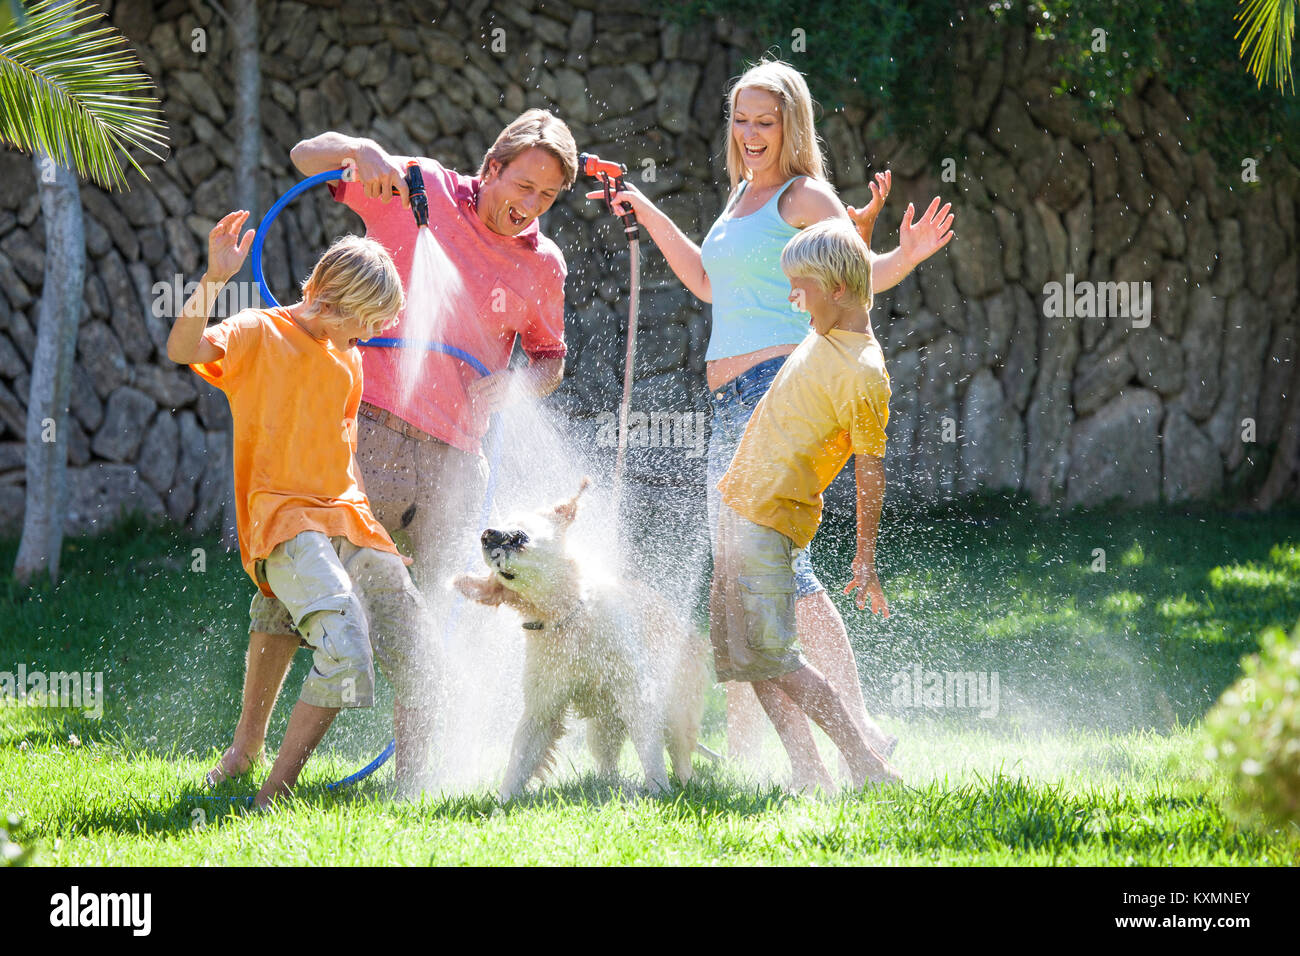 Family spraying dog with water from hosepipe Stock Photo